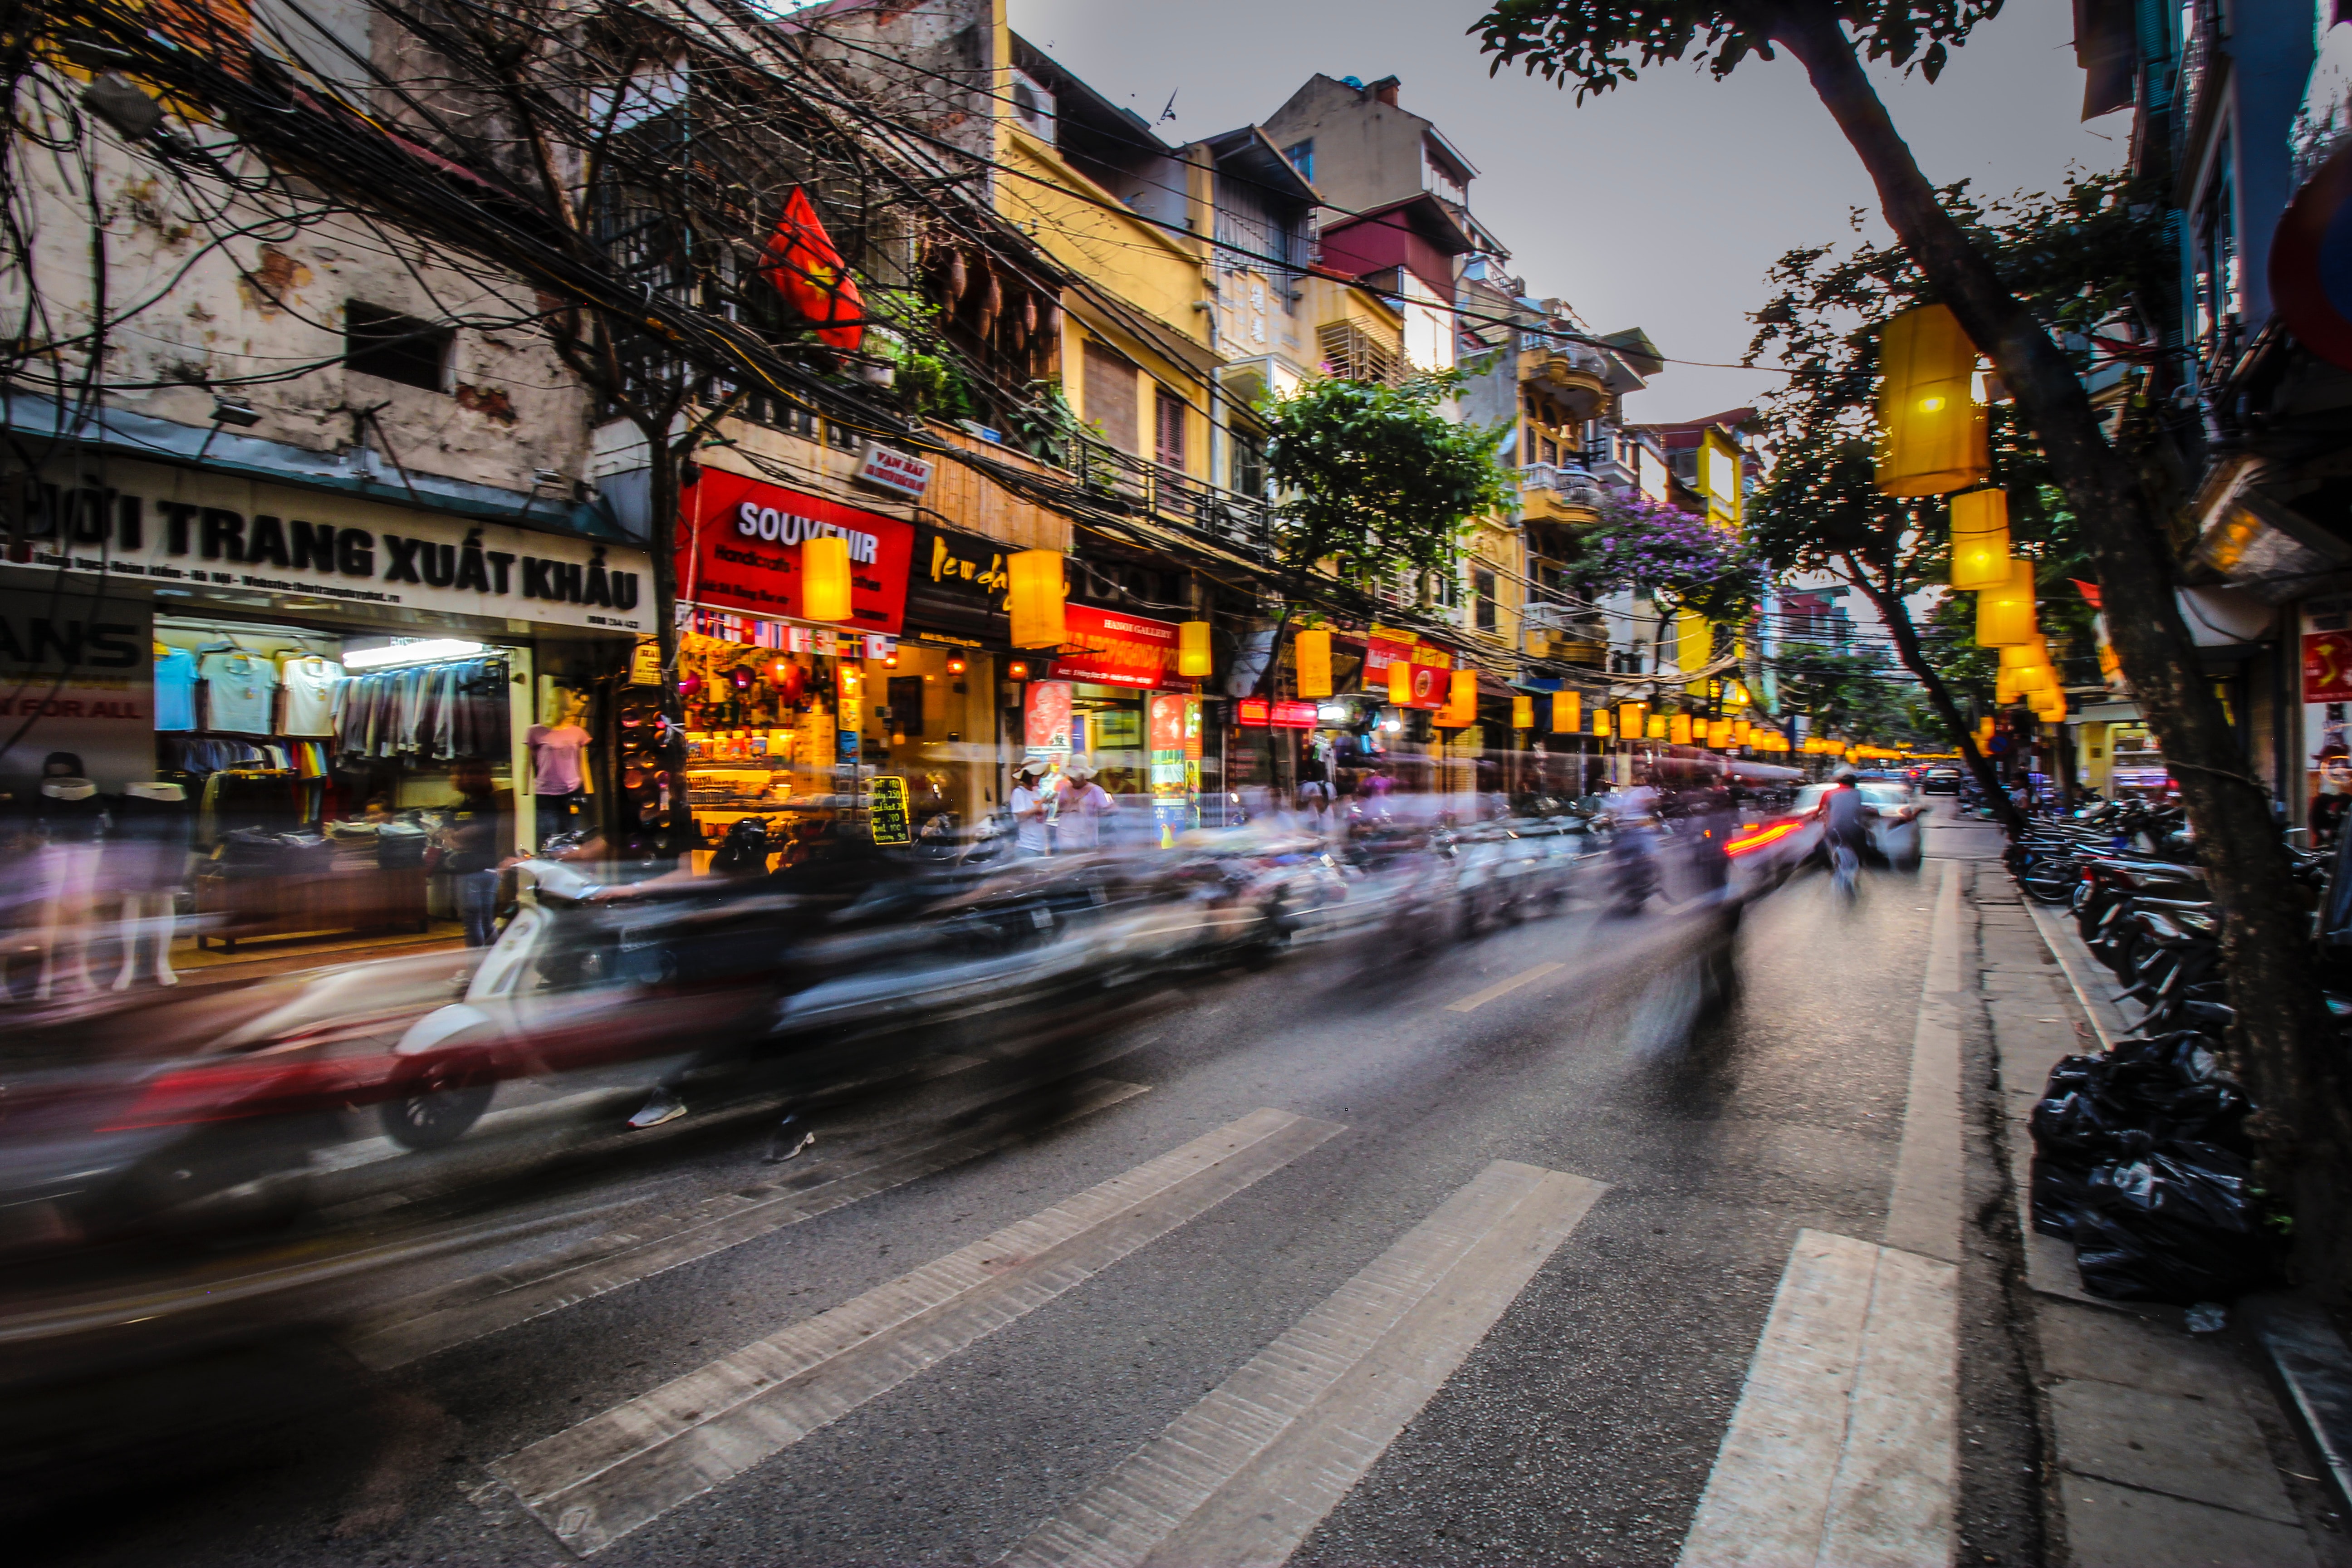 Vietnam travel tips - stay safe on the street